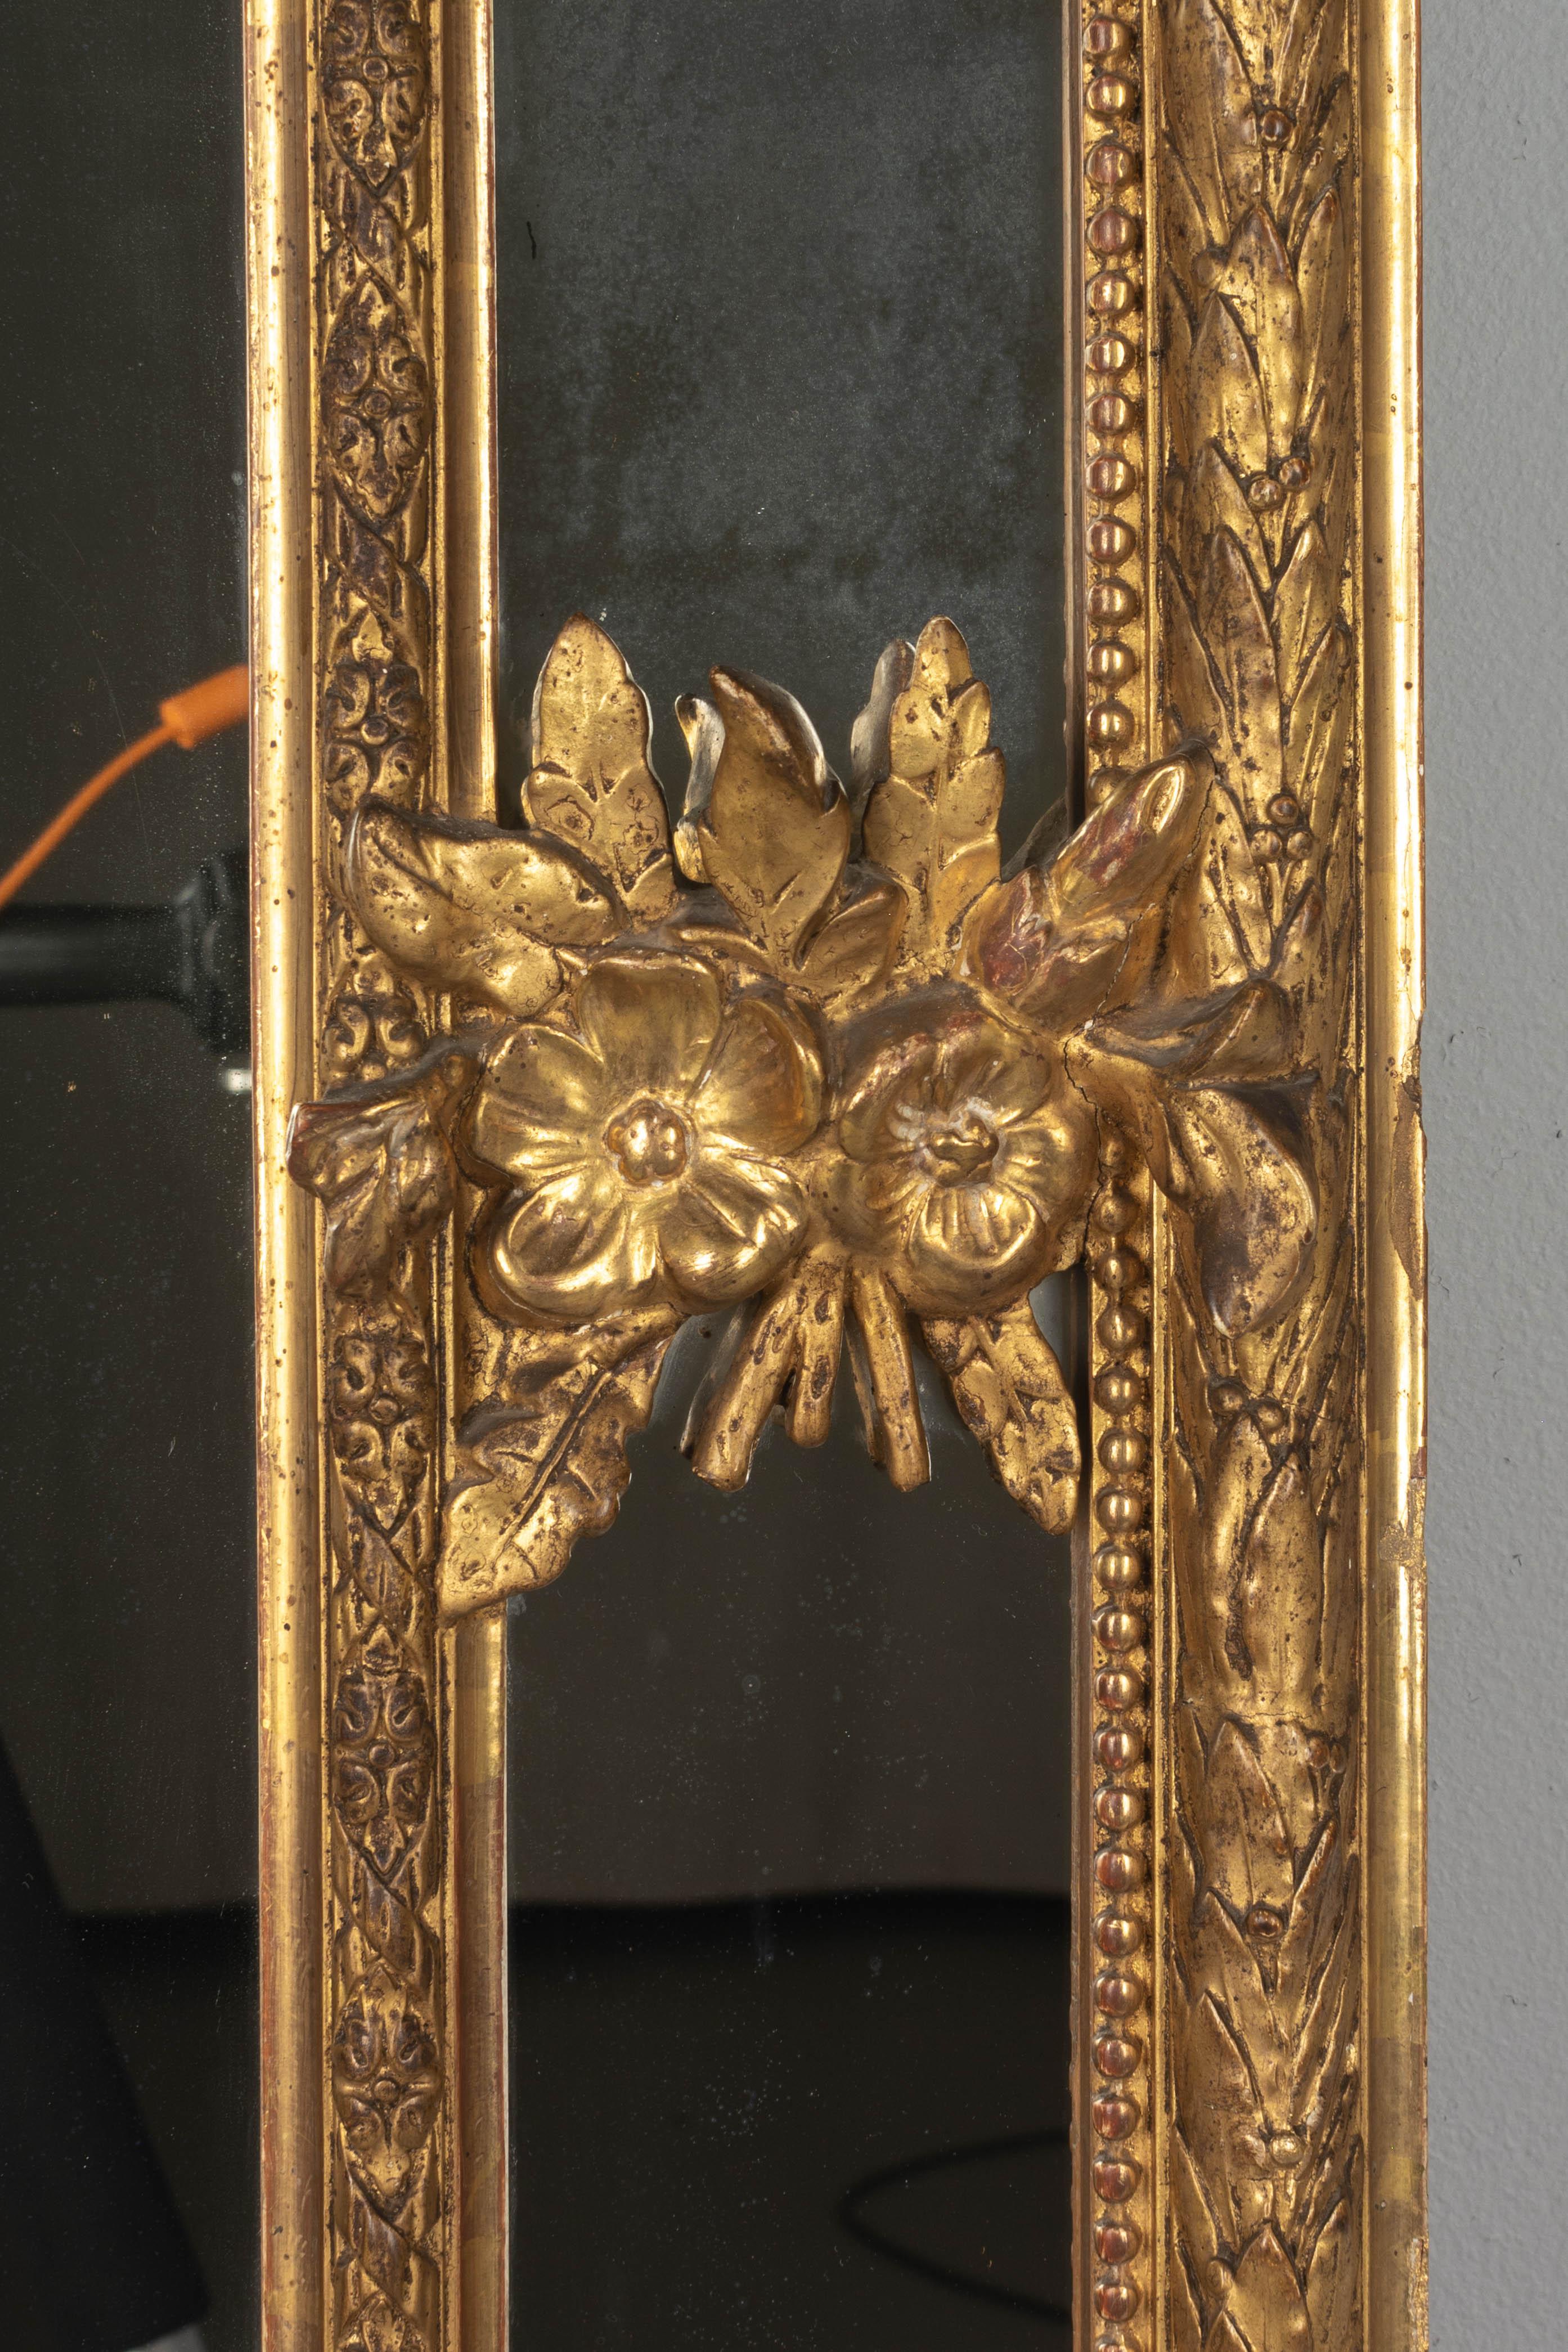 19th Century French Louis XV Style Gilded Parclose Mirror In Good Condition For Sale In Winter Park, FL